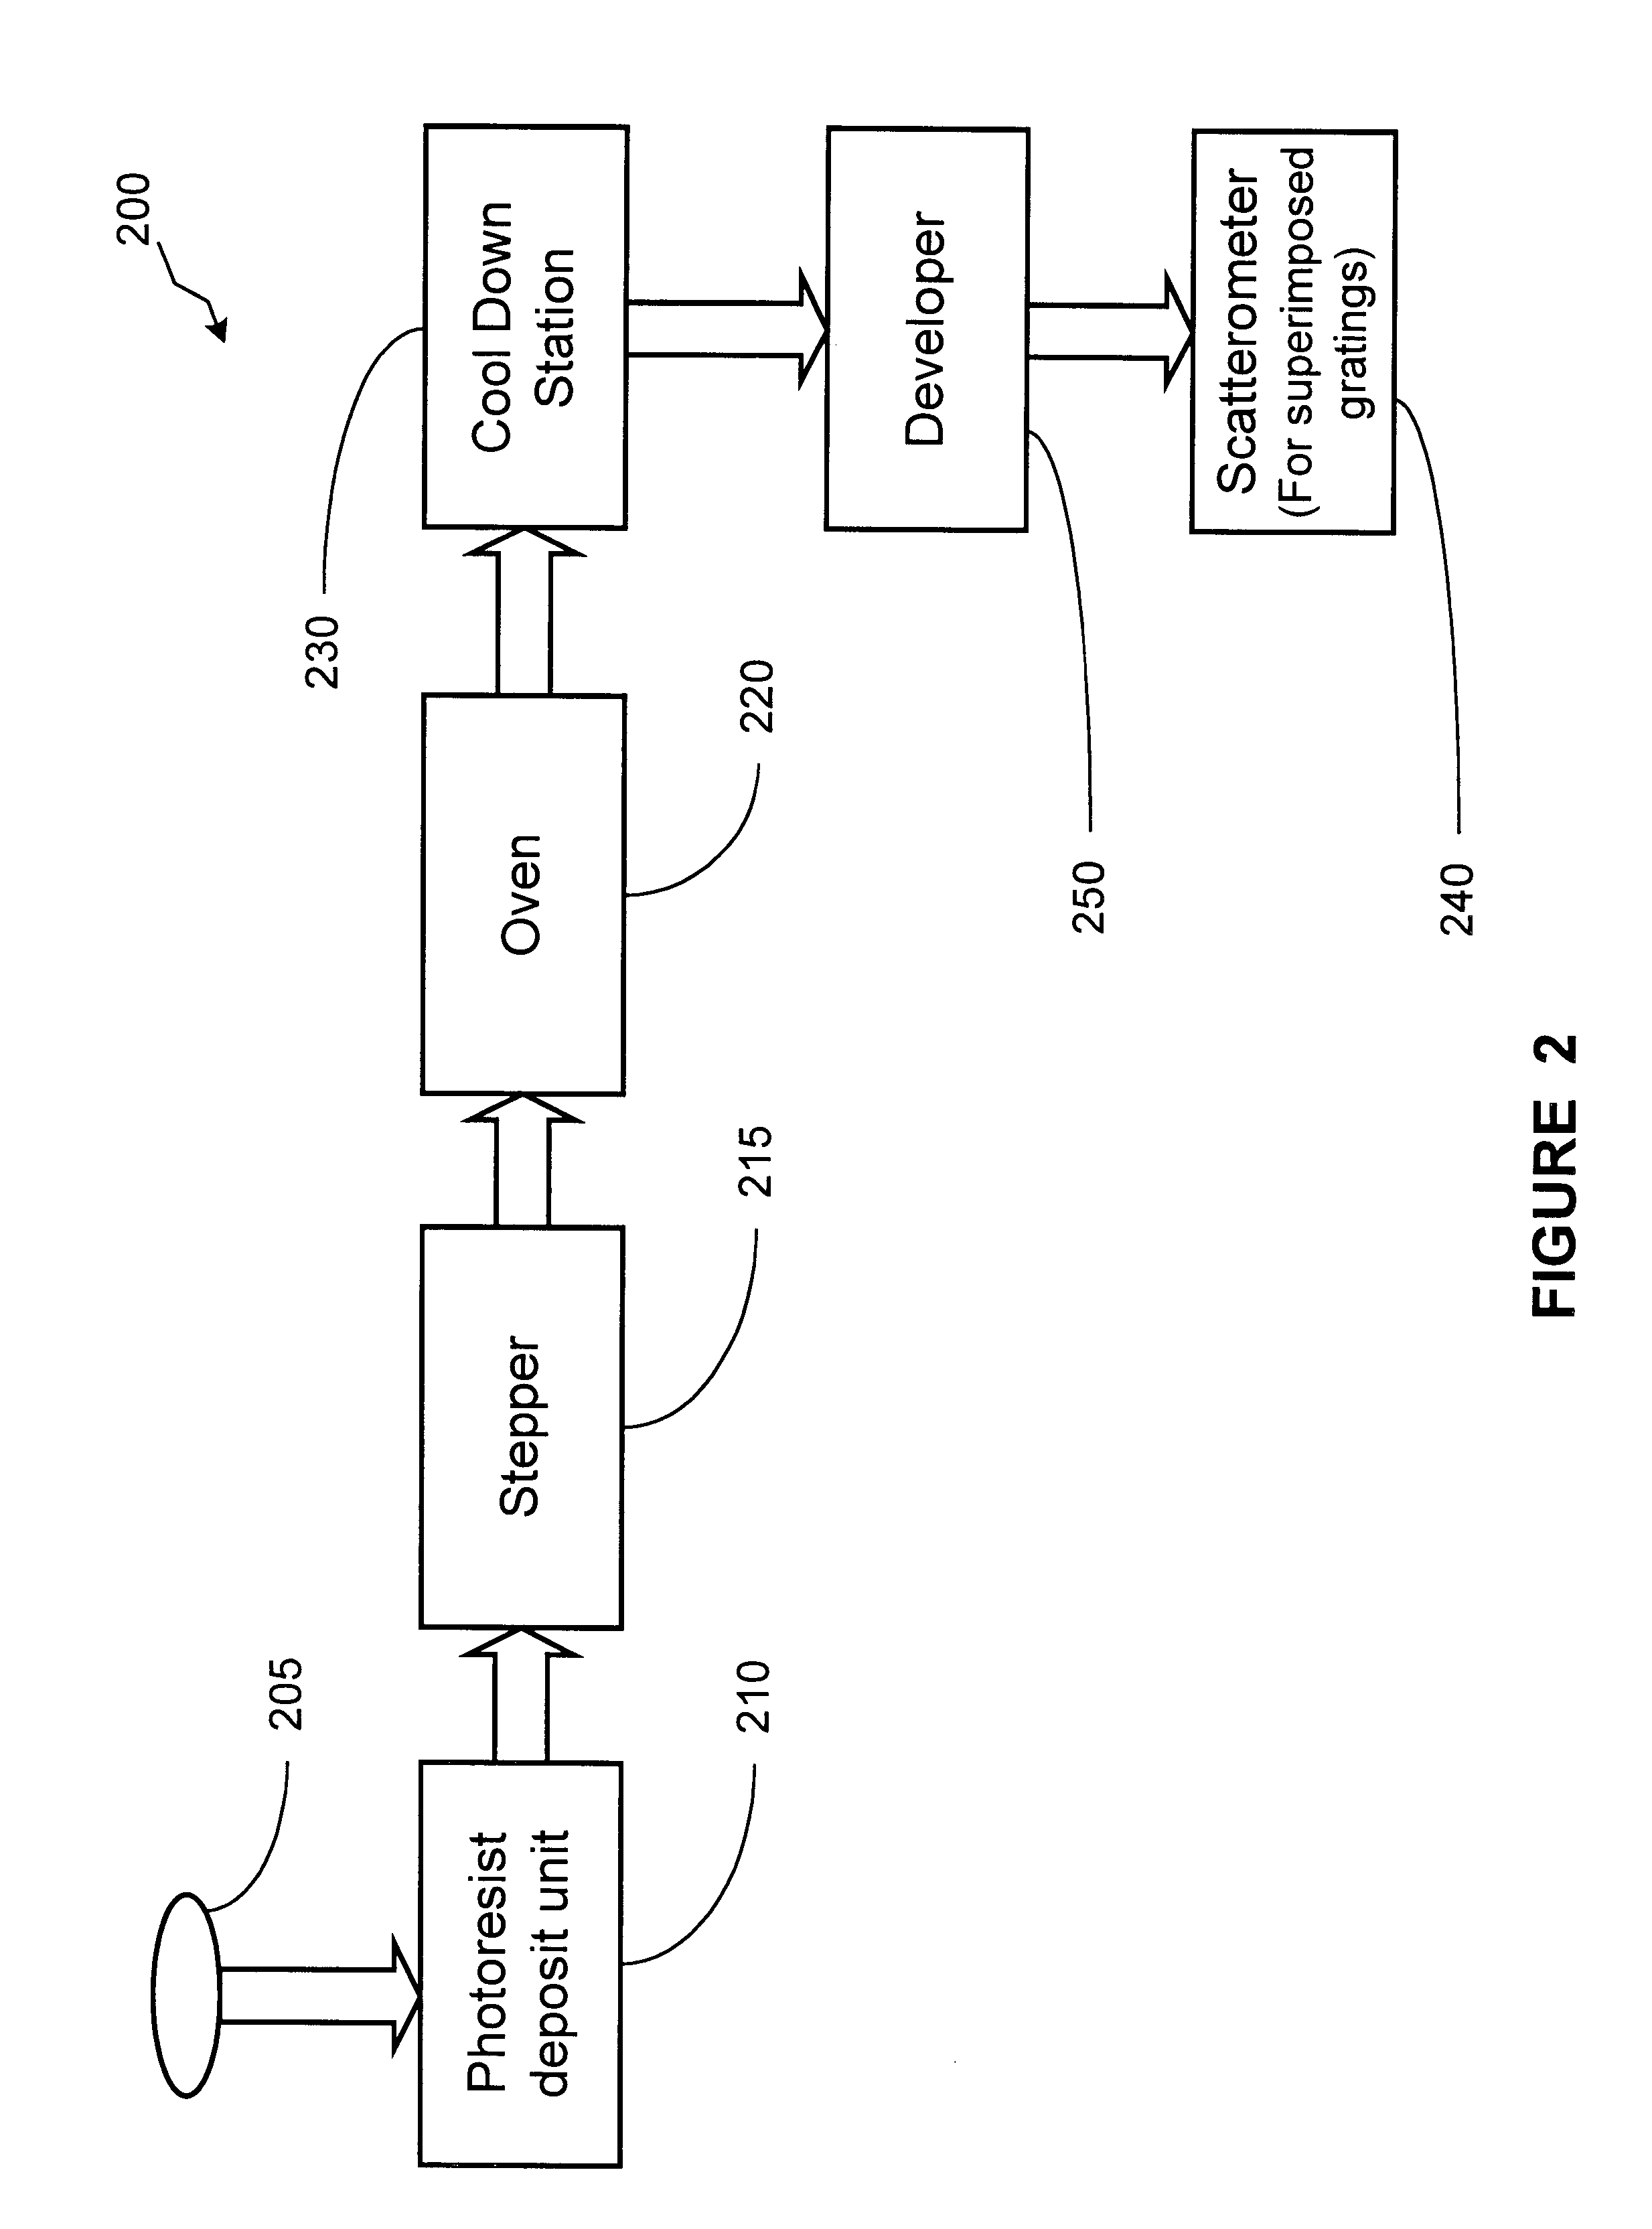 Method and apparatus for monitoring wafer stress